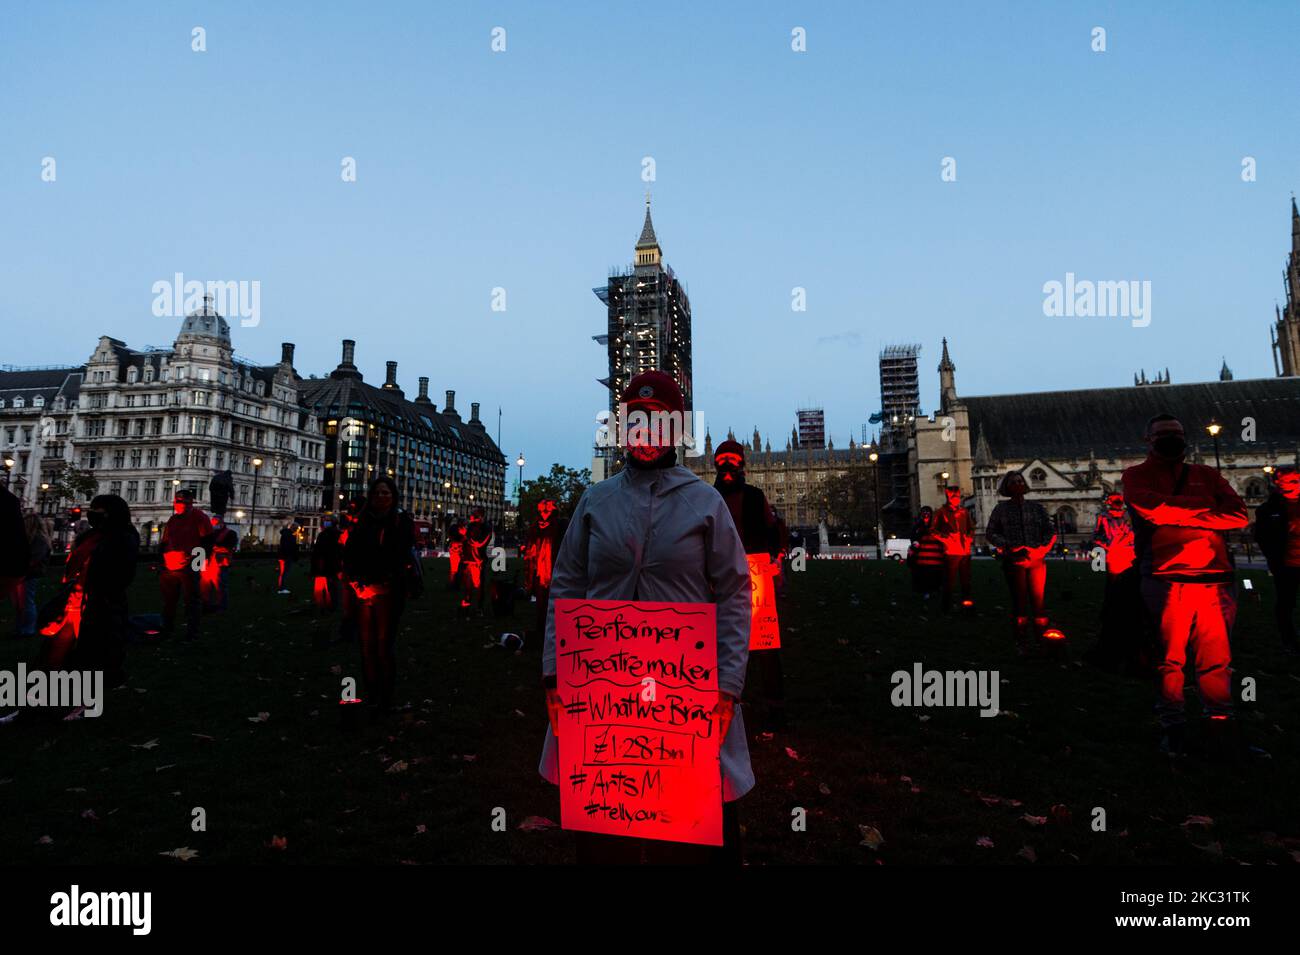 A socially distanced line of #WeMakeEvents supporters and technical crew congregate in the Parliament Square to take their bow following the week’s creative activations on October 31, 2020 in London, United Kingdom. The aim is to showcase the breadth of live events and the technical supply chain that support them, and that live events need government policies in place to help people to return to work and further financial aid until everyone can return. The protest has been organised by We Stand As One #WeMakeEvents who are calling for meaningful support from the Government until the industry i Stock Photo